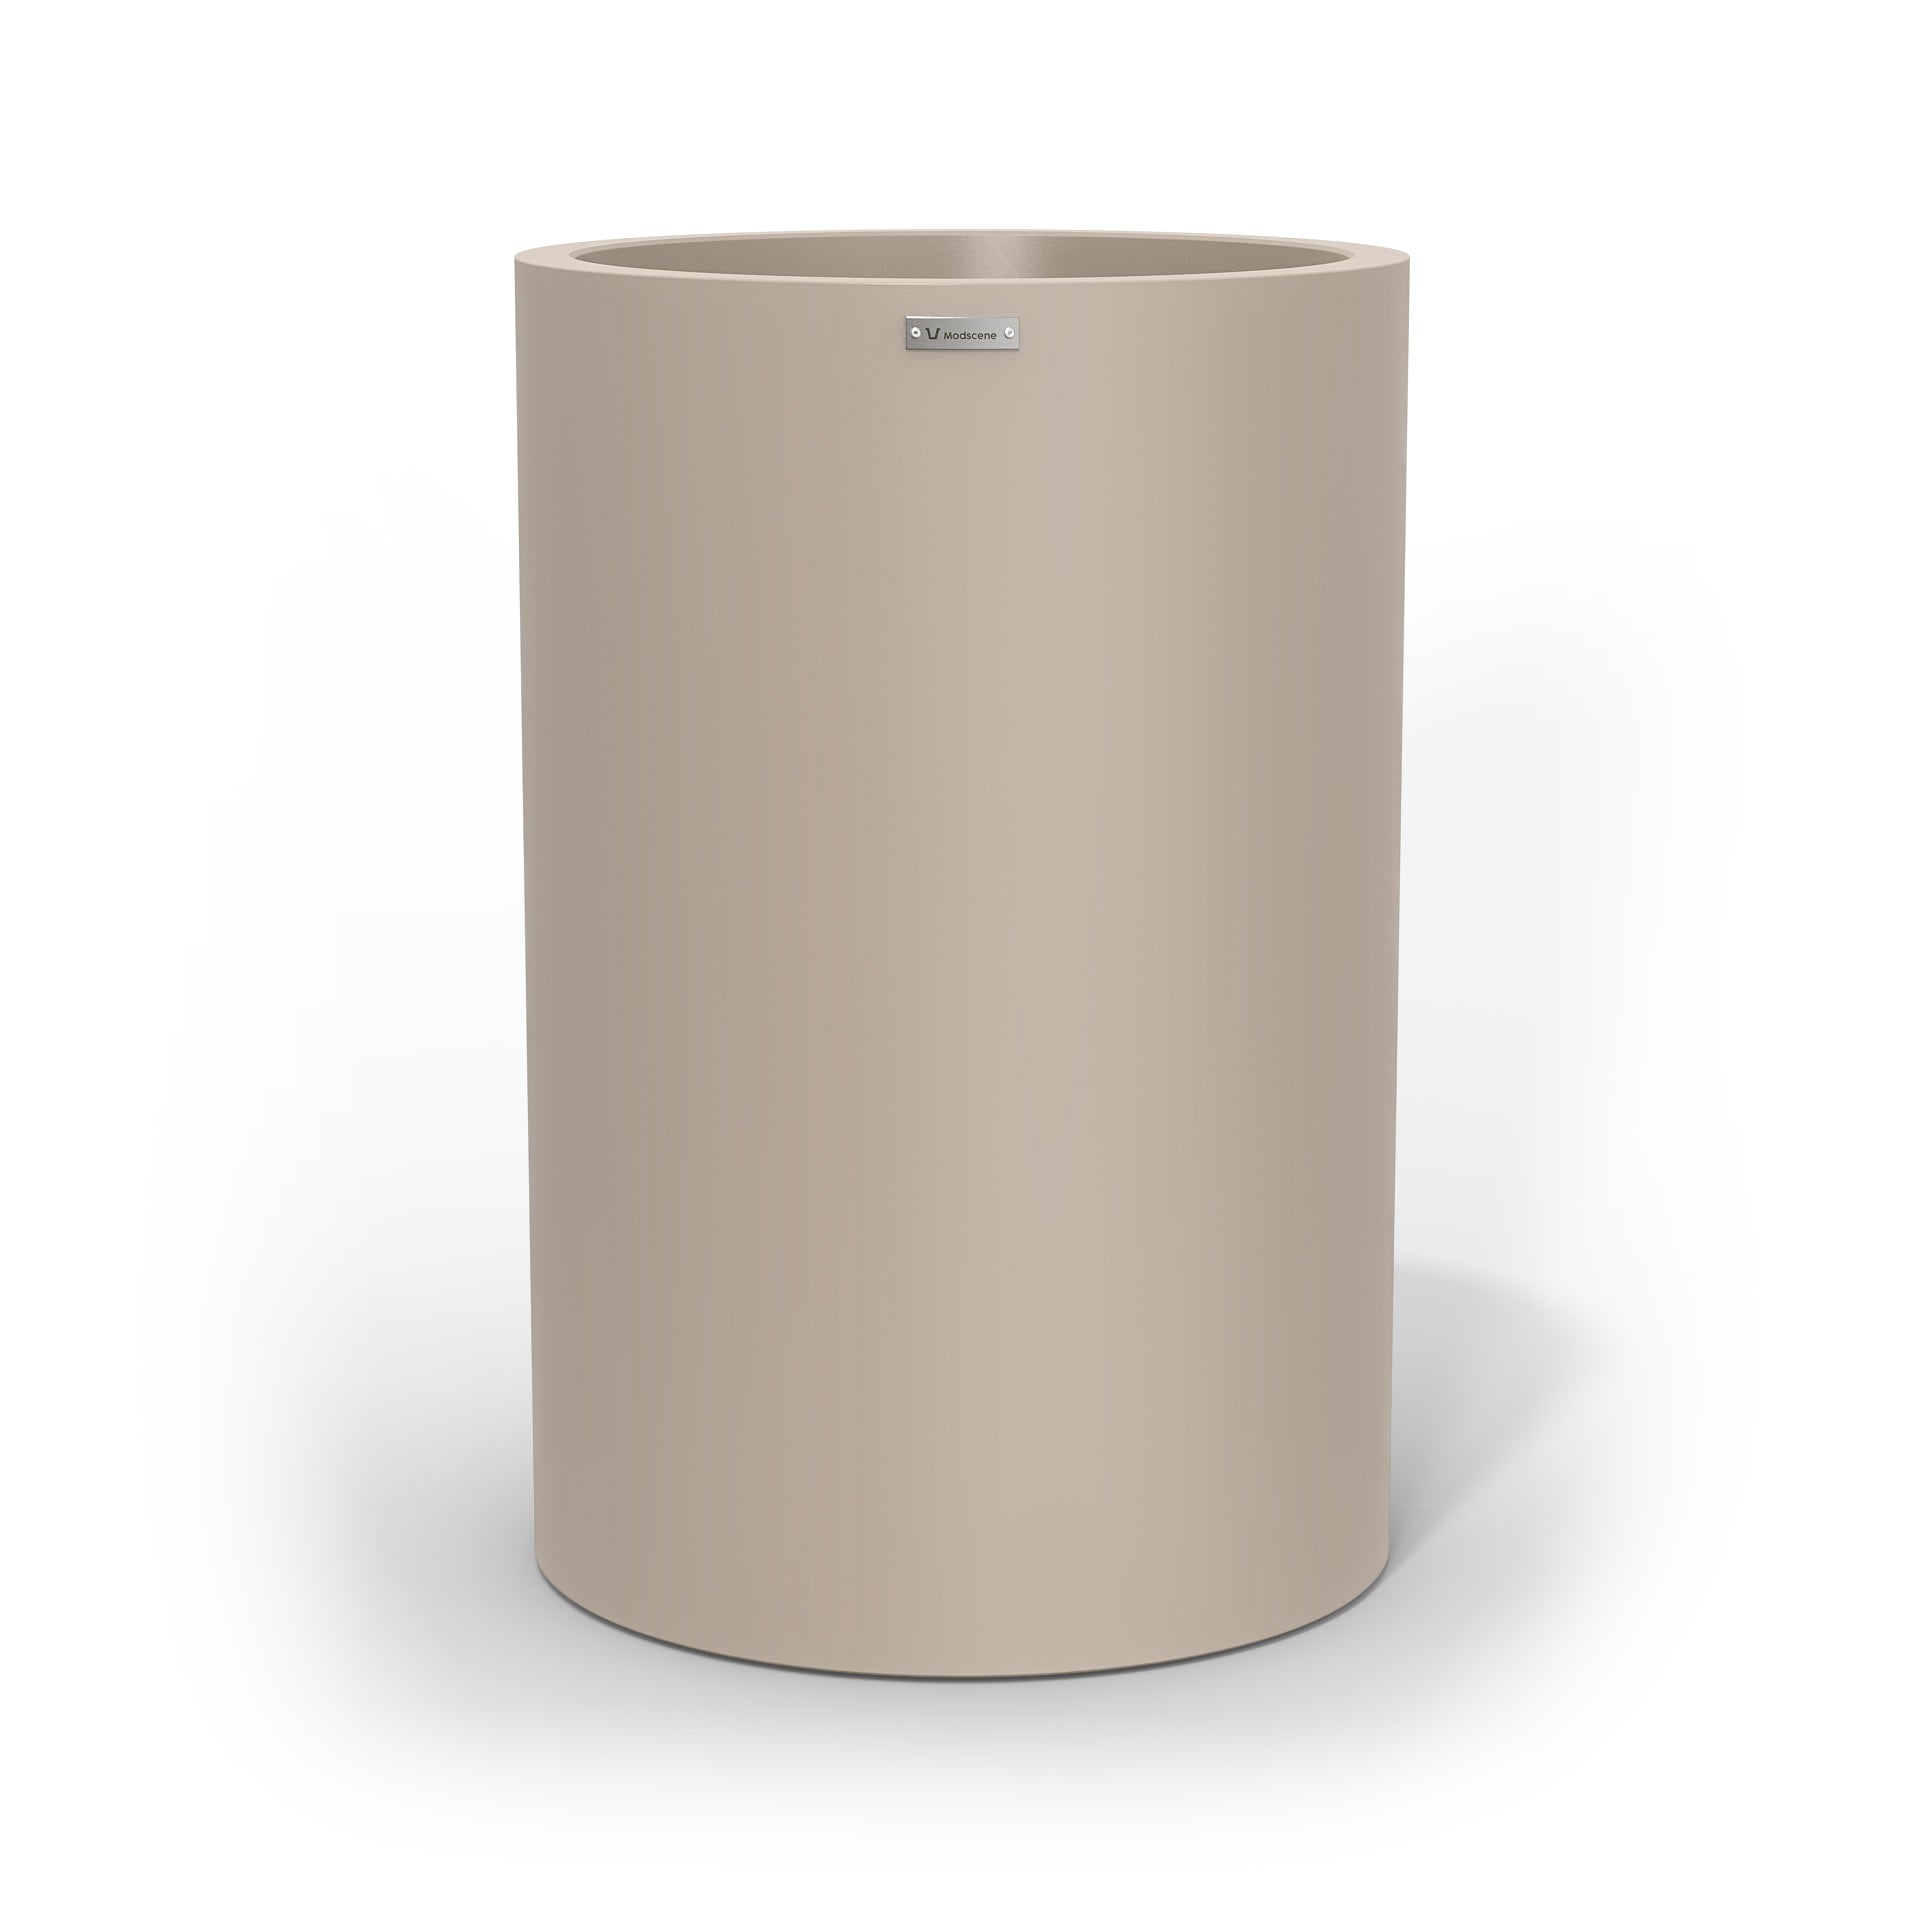 Large Modscene cylinder shaped planter pot in a sand stone colour. New Zealand made.